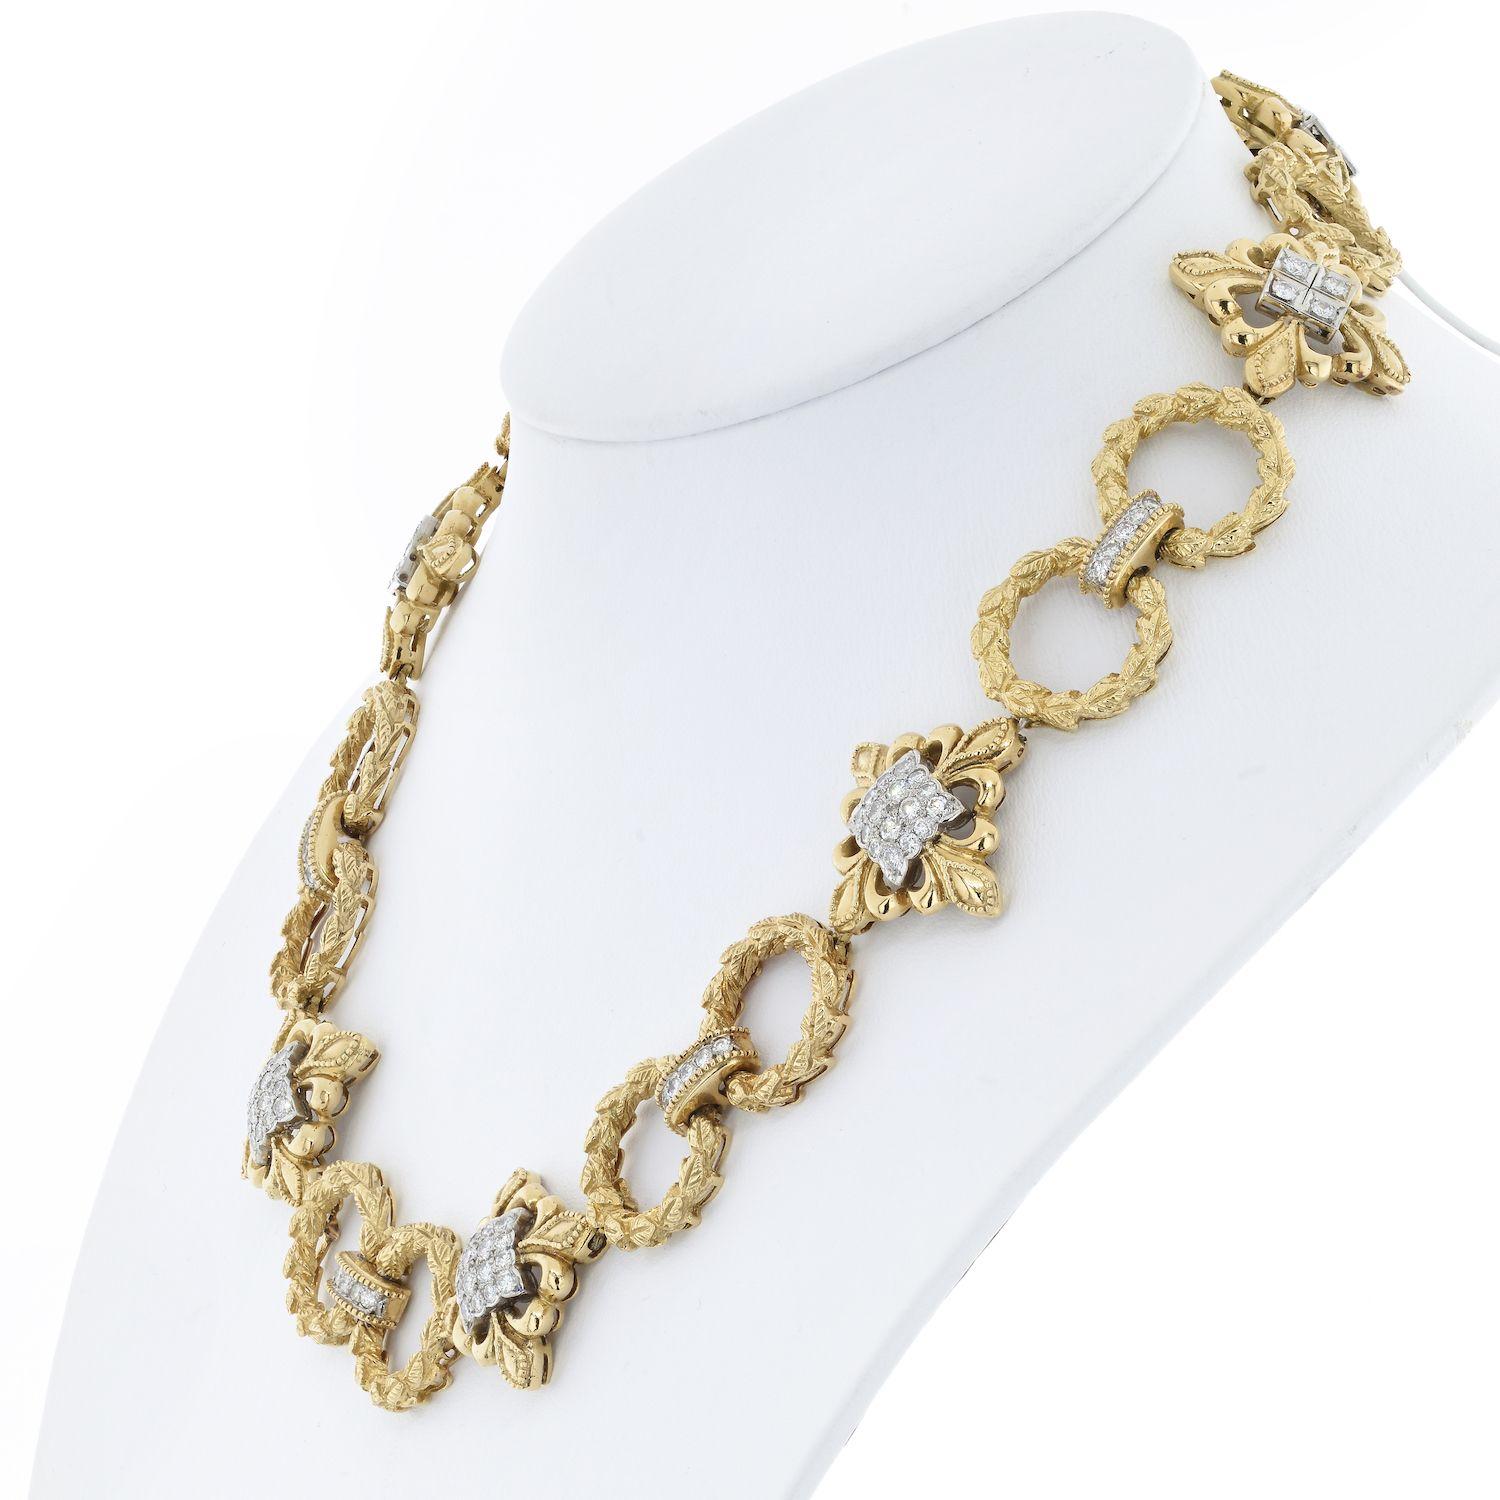 Finely crafted in 18k yellow gold open link diamond necklace by Wander France. Approx. 5 carats in diamonds. 18 inches long. 